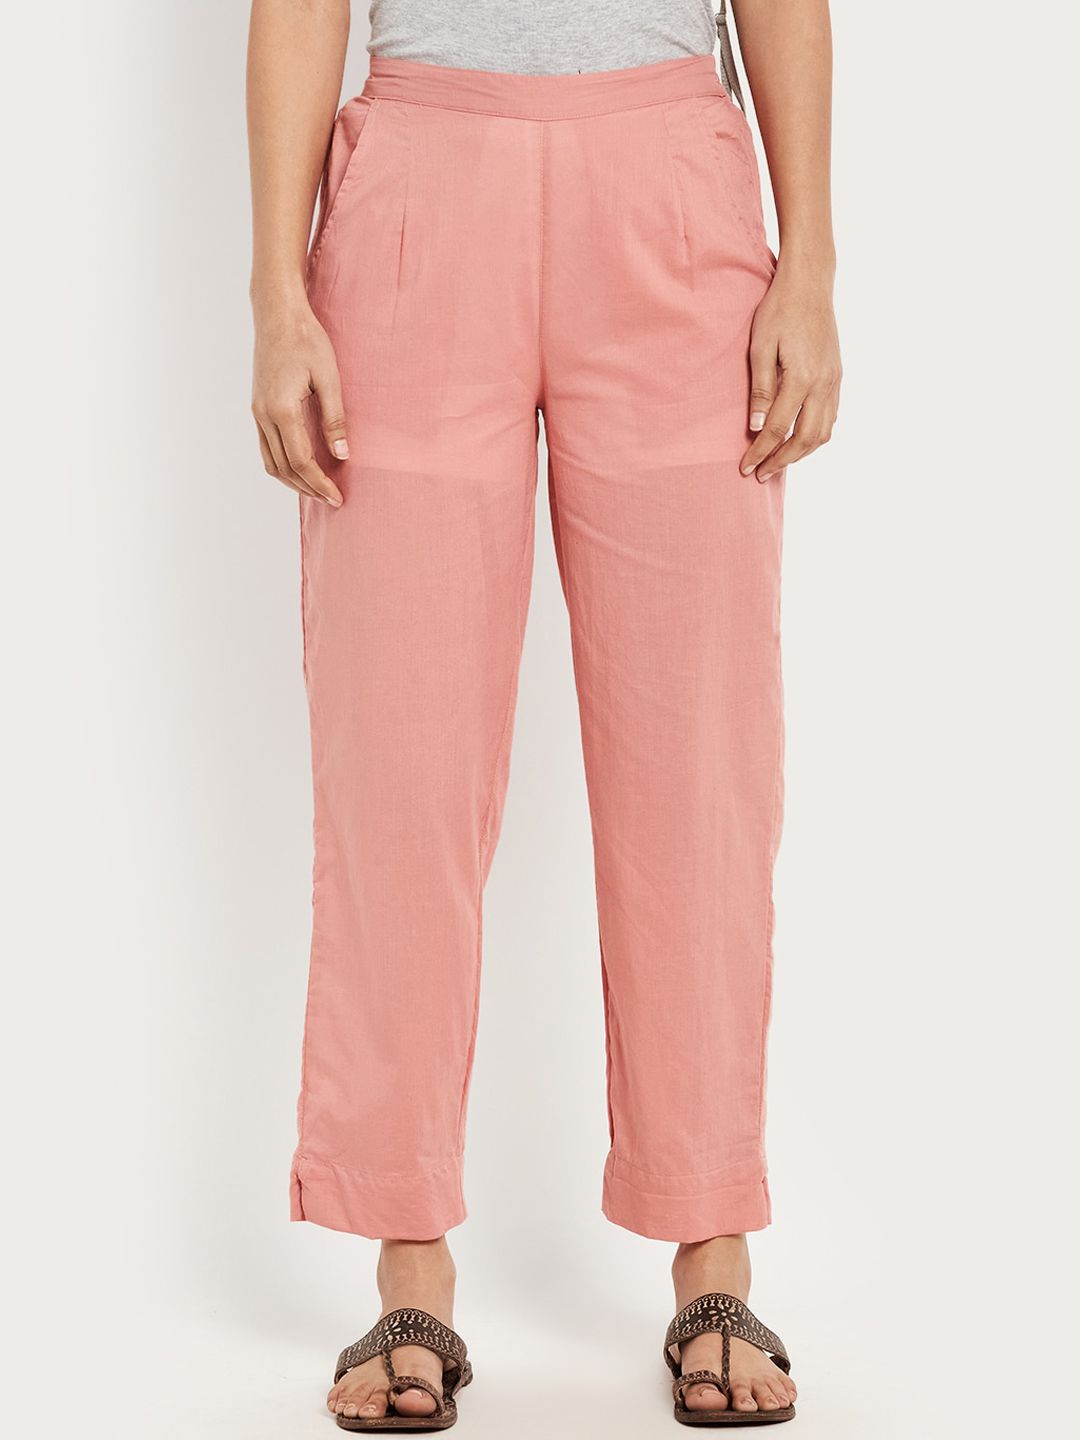 Fabindia Women Pink Pleated Regular Fit Trousers Price in India